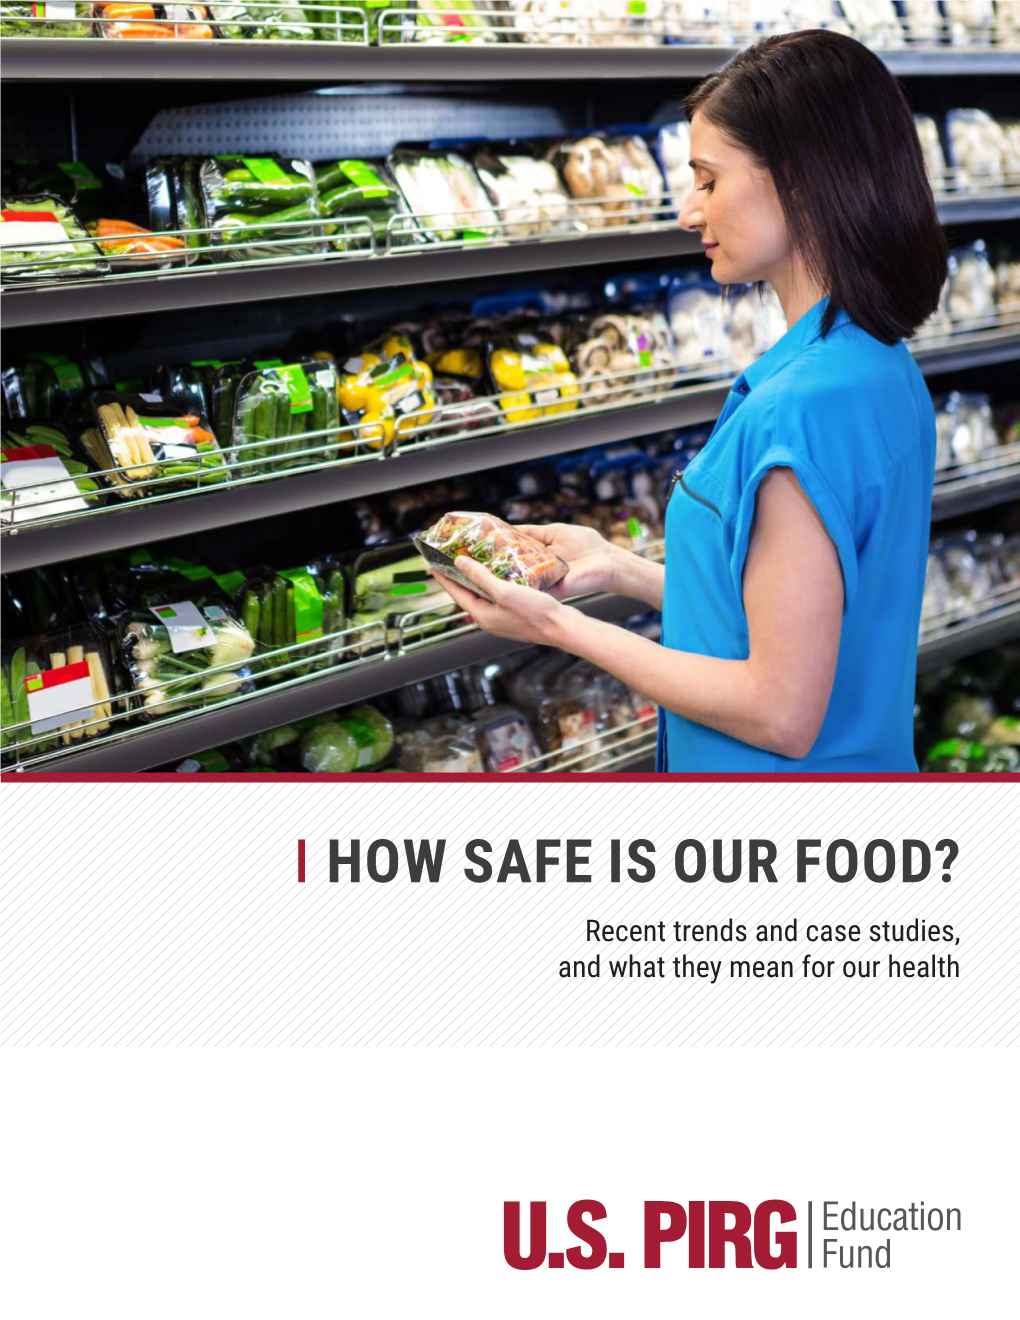 HOW SAFE IS OUR FOOD? Recent Trends and Case Studies, and What They Mean for Our Health HOW SAFE IS OUR FOOD?